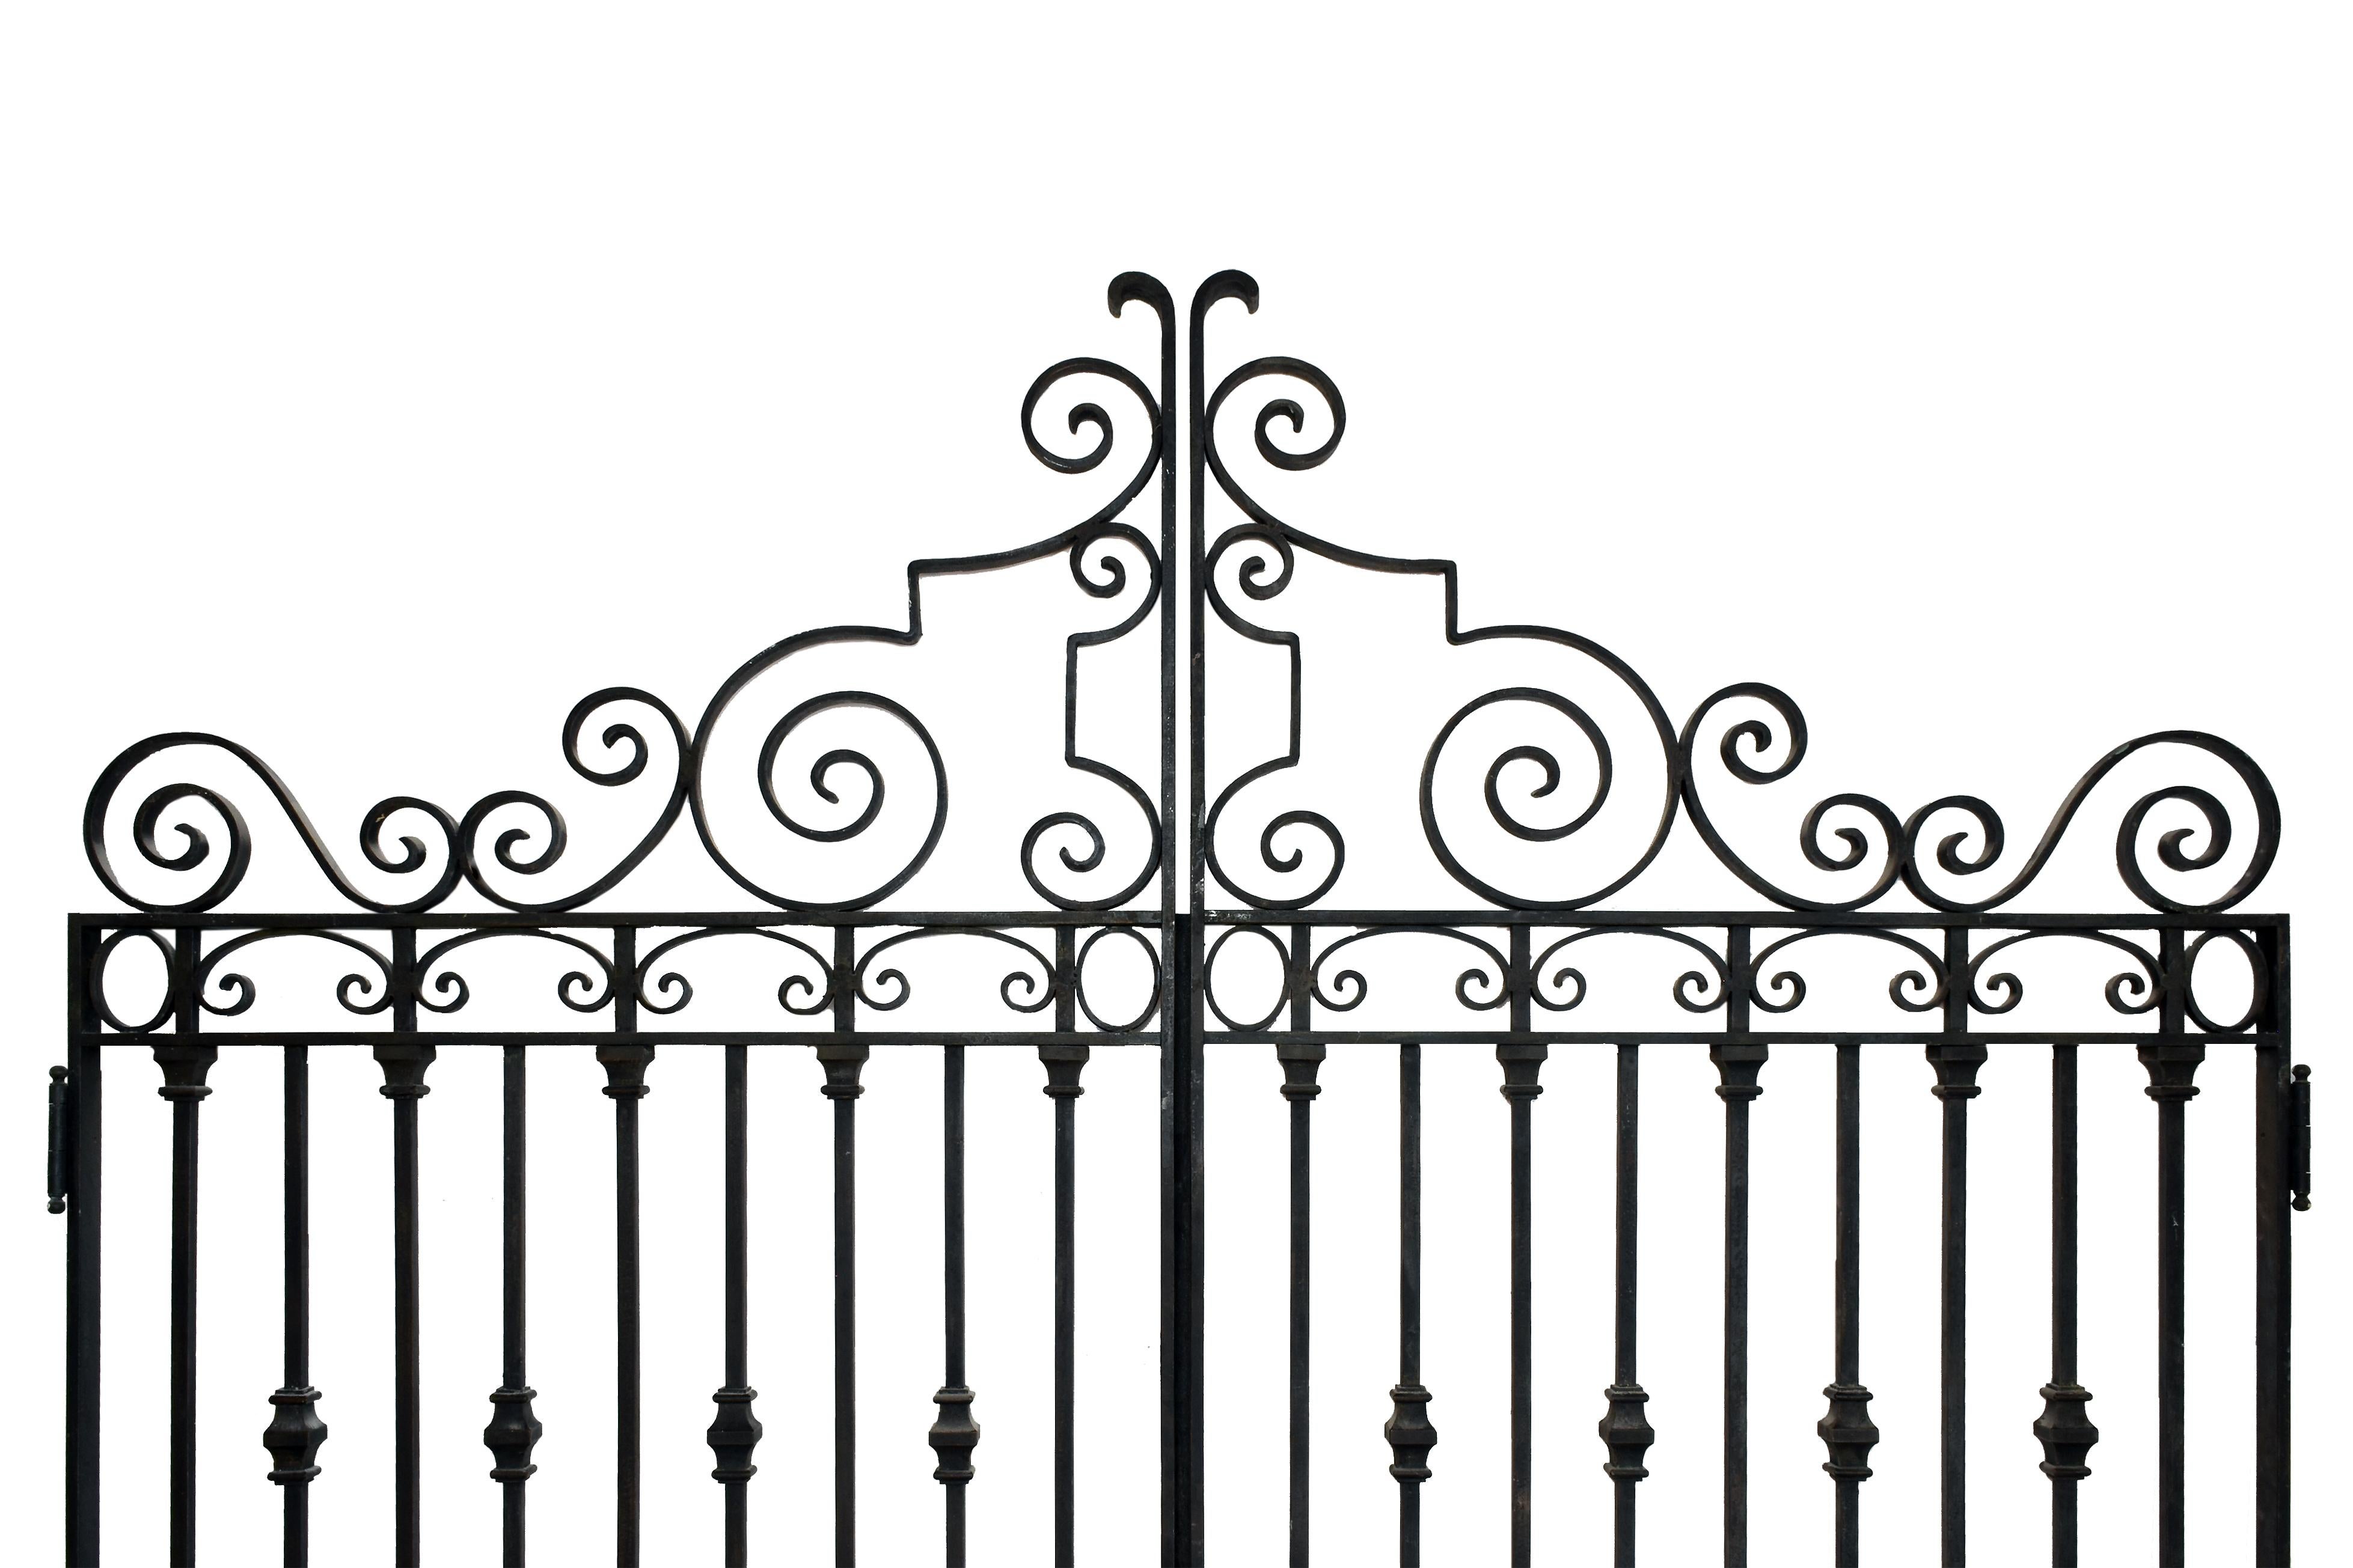 This door set could be used as a grand garden entry or a private pedestrian gate. They are a simple Art Deco design with geometric, curved, and beaded elements. The lower vertical rods feature alternating twisted wrought iron and simple capped